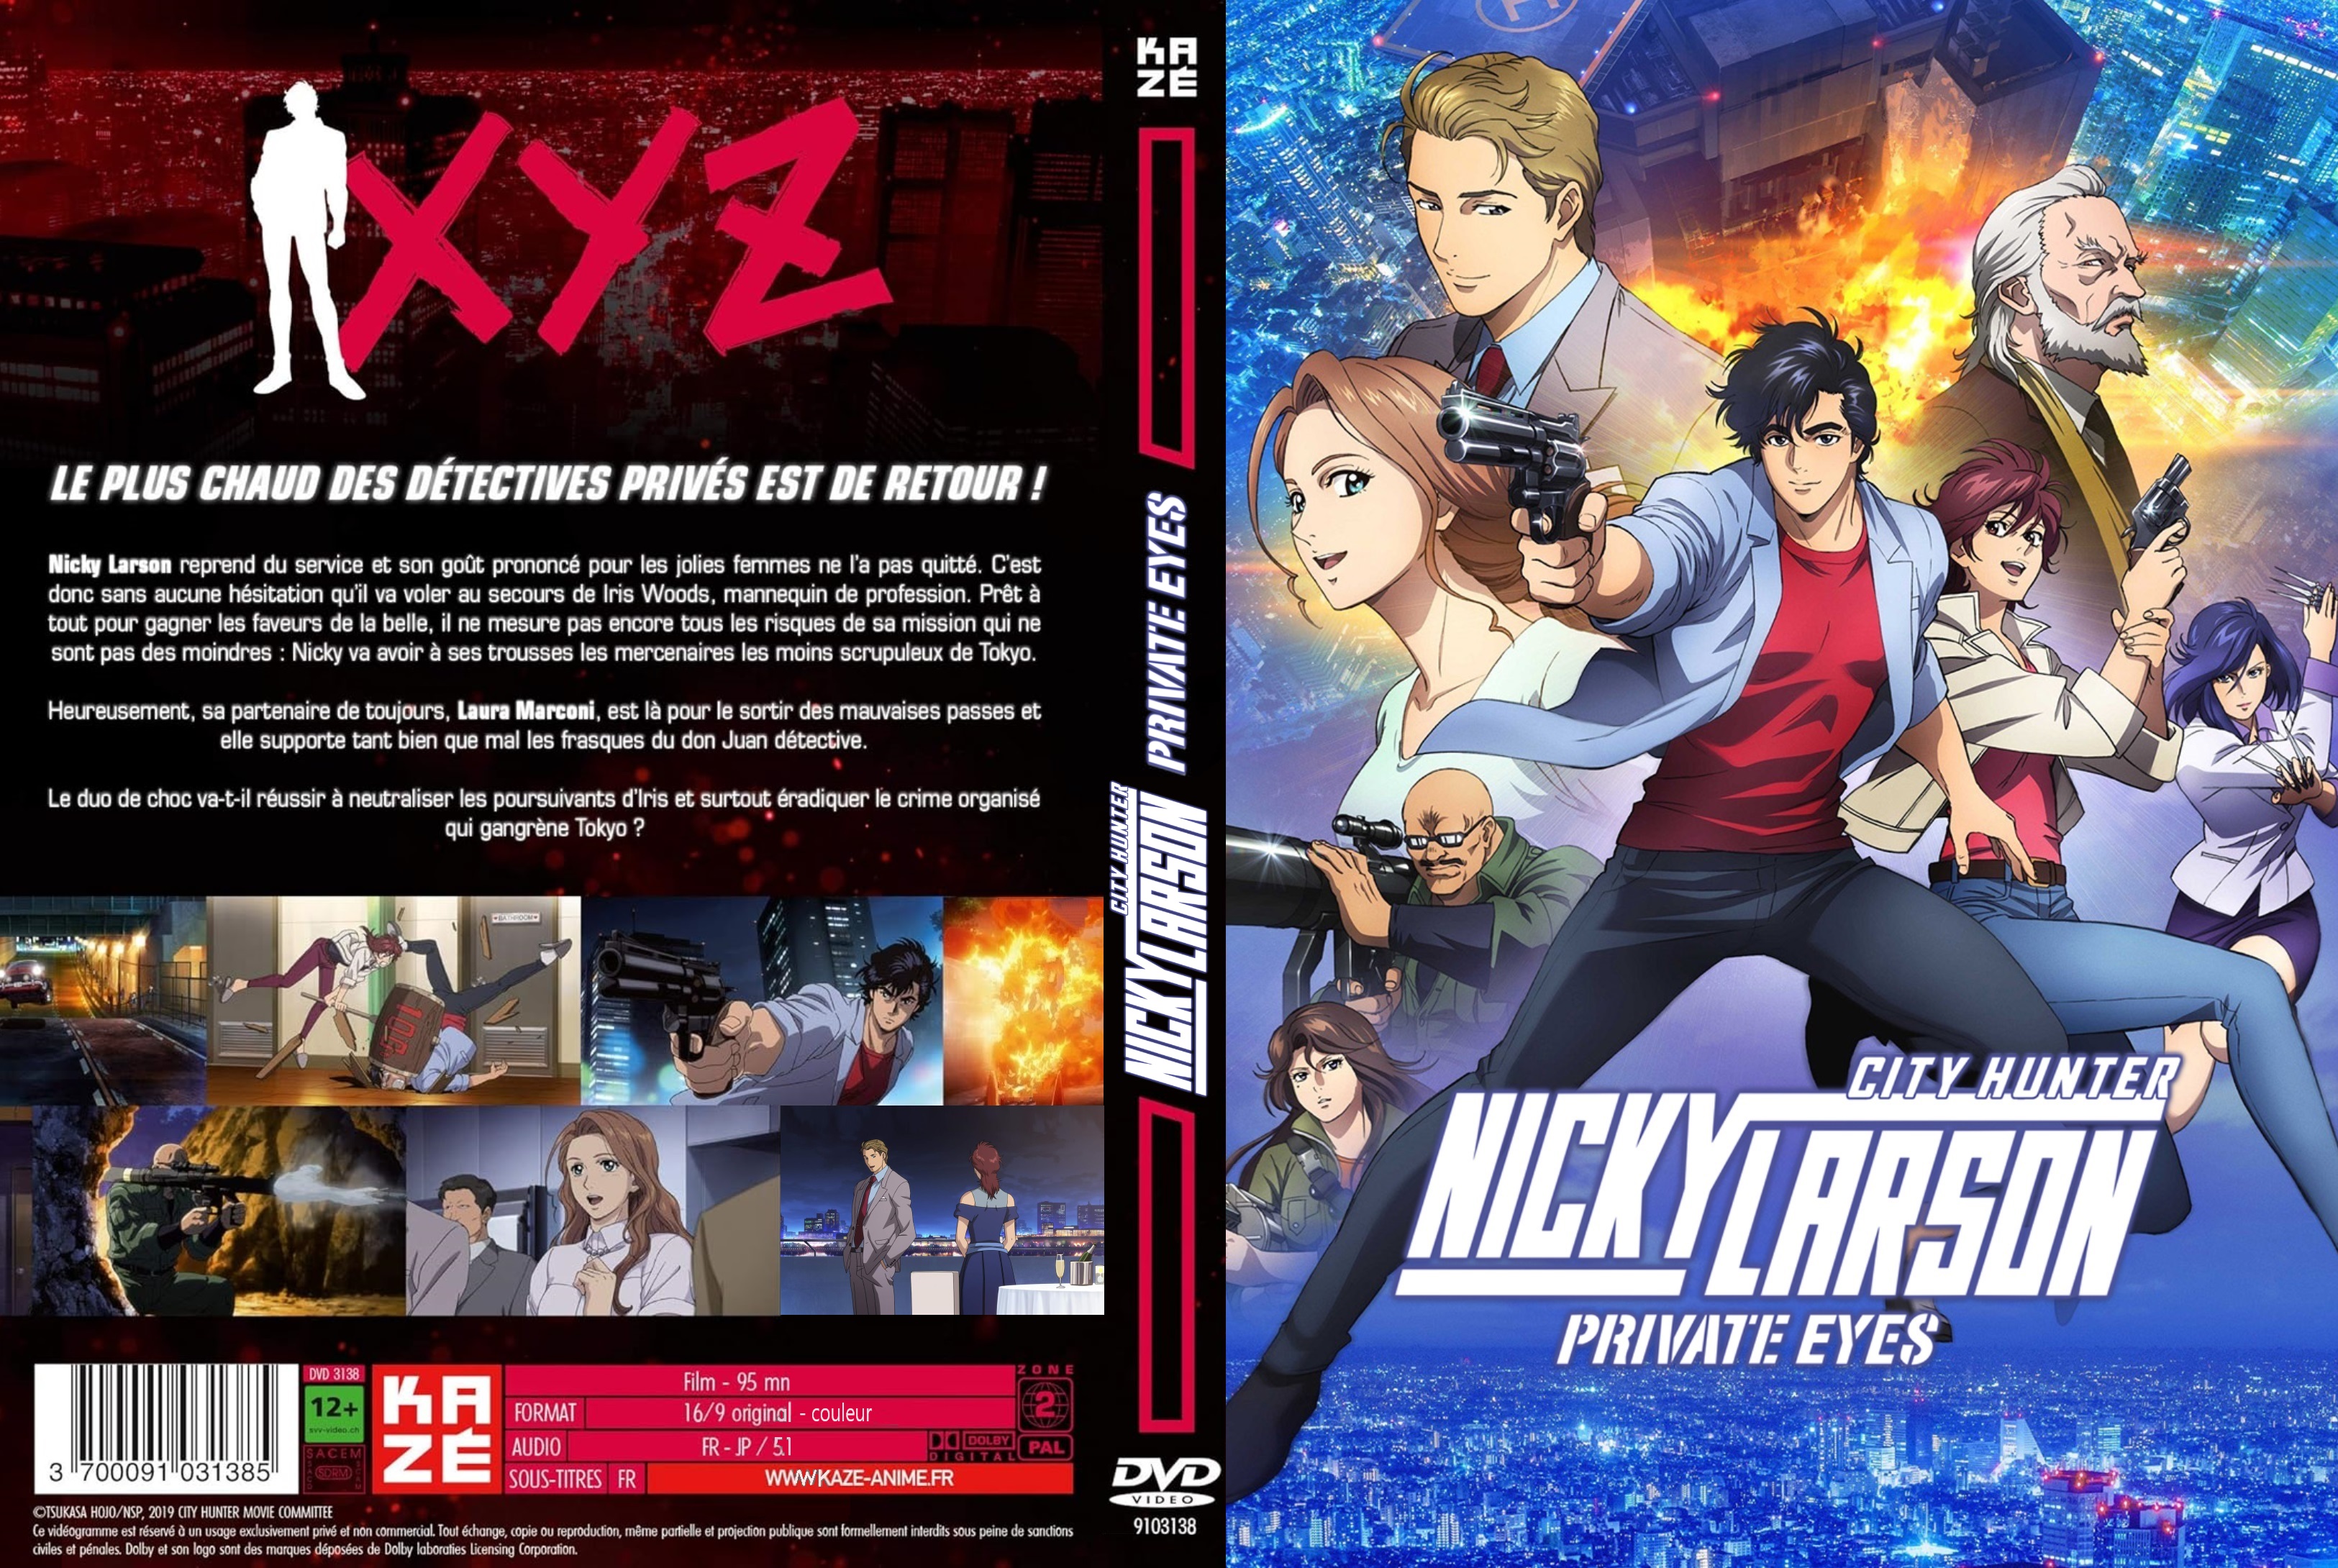 Jaquette DVD Nicky Larson Private Eyes custom